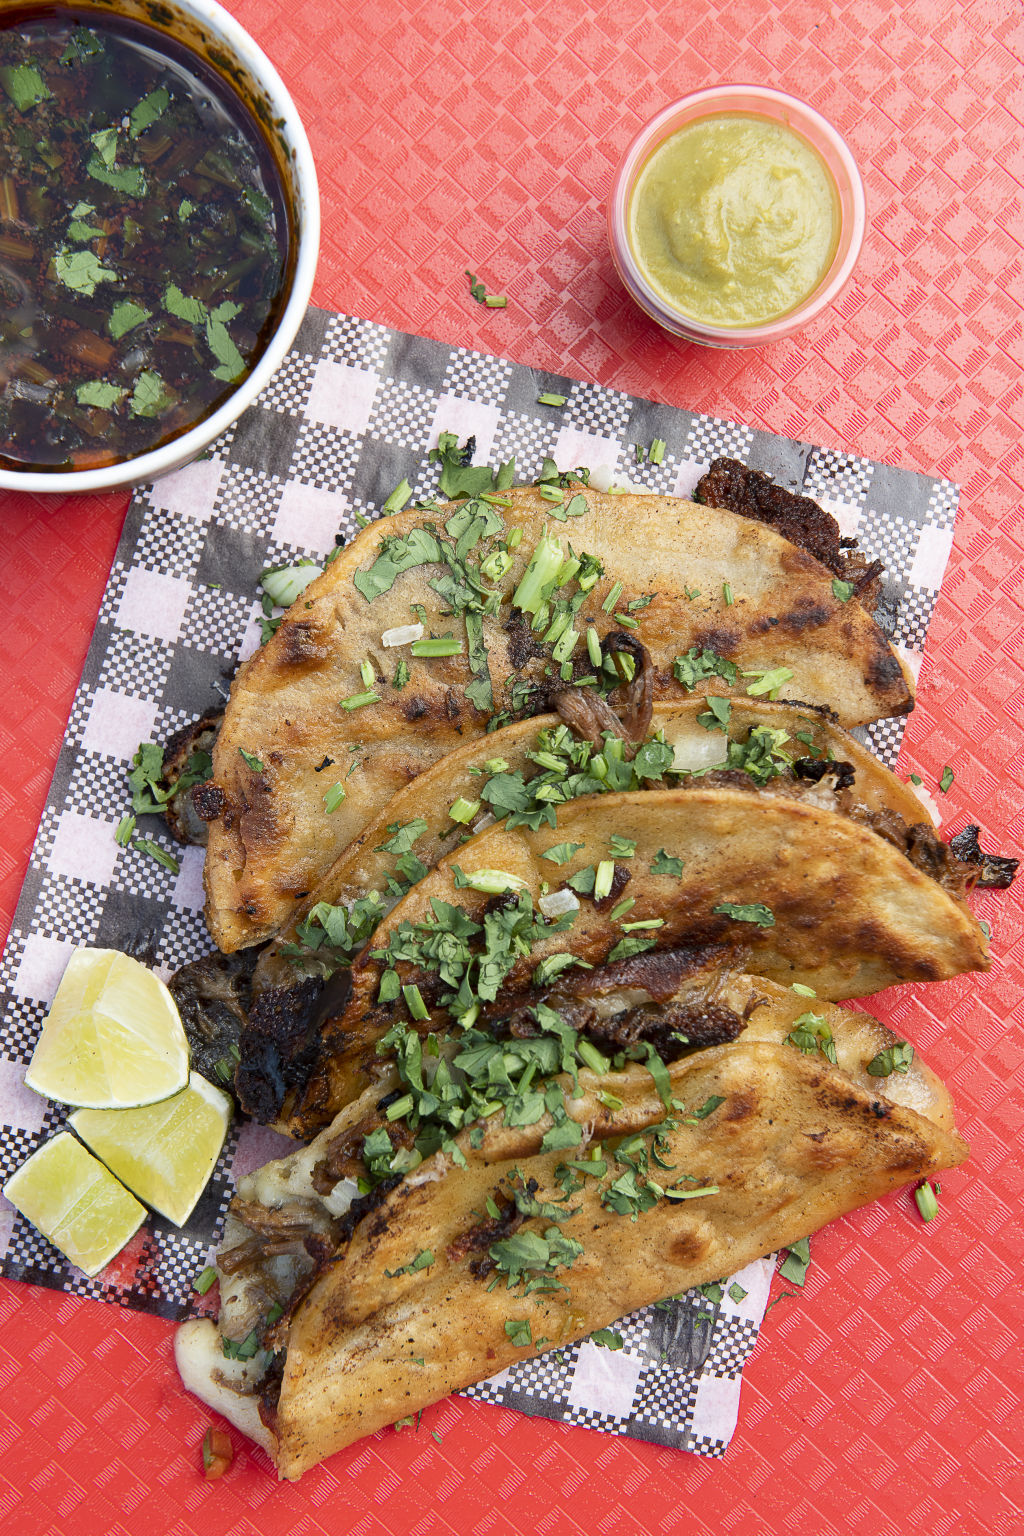 The birria quesa tacos, Old El Paso eat your heart out.  Photo: Carmen Zammit